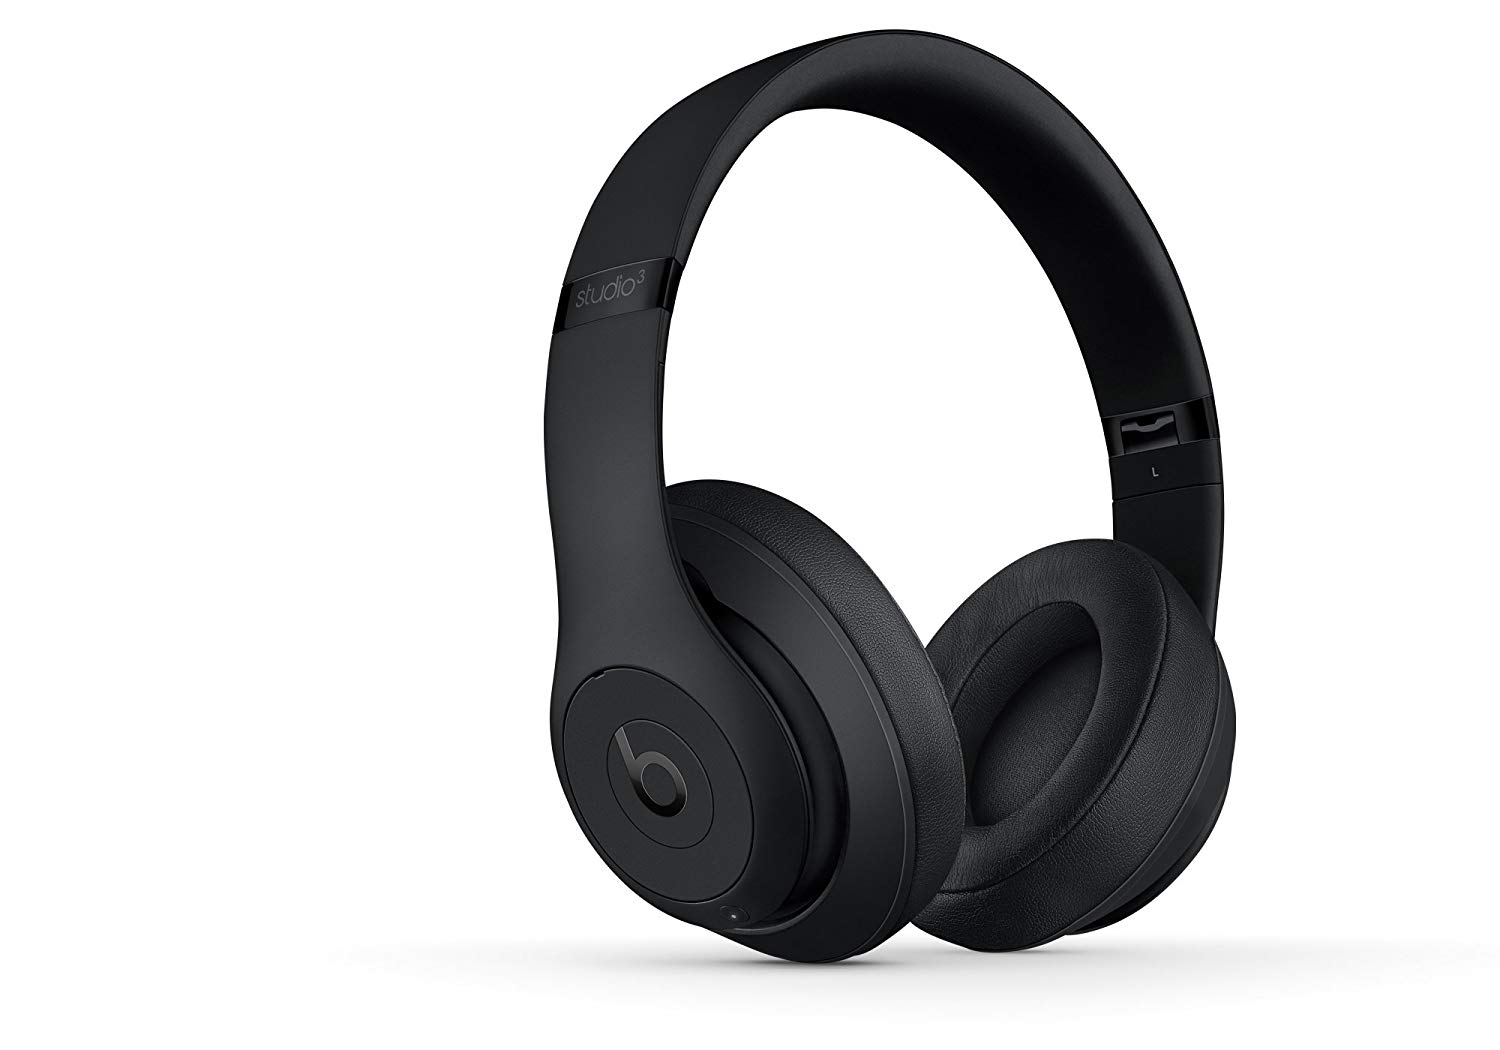 The Beats Studio3 Wireless headphones in black against a white background.